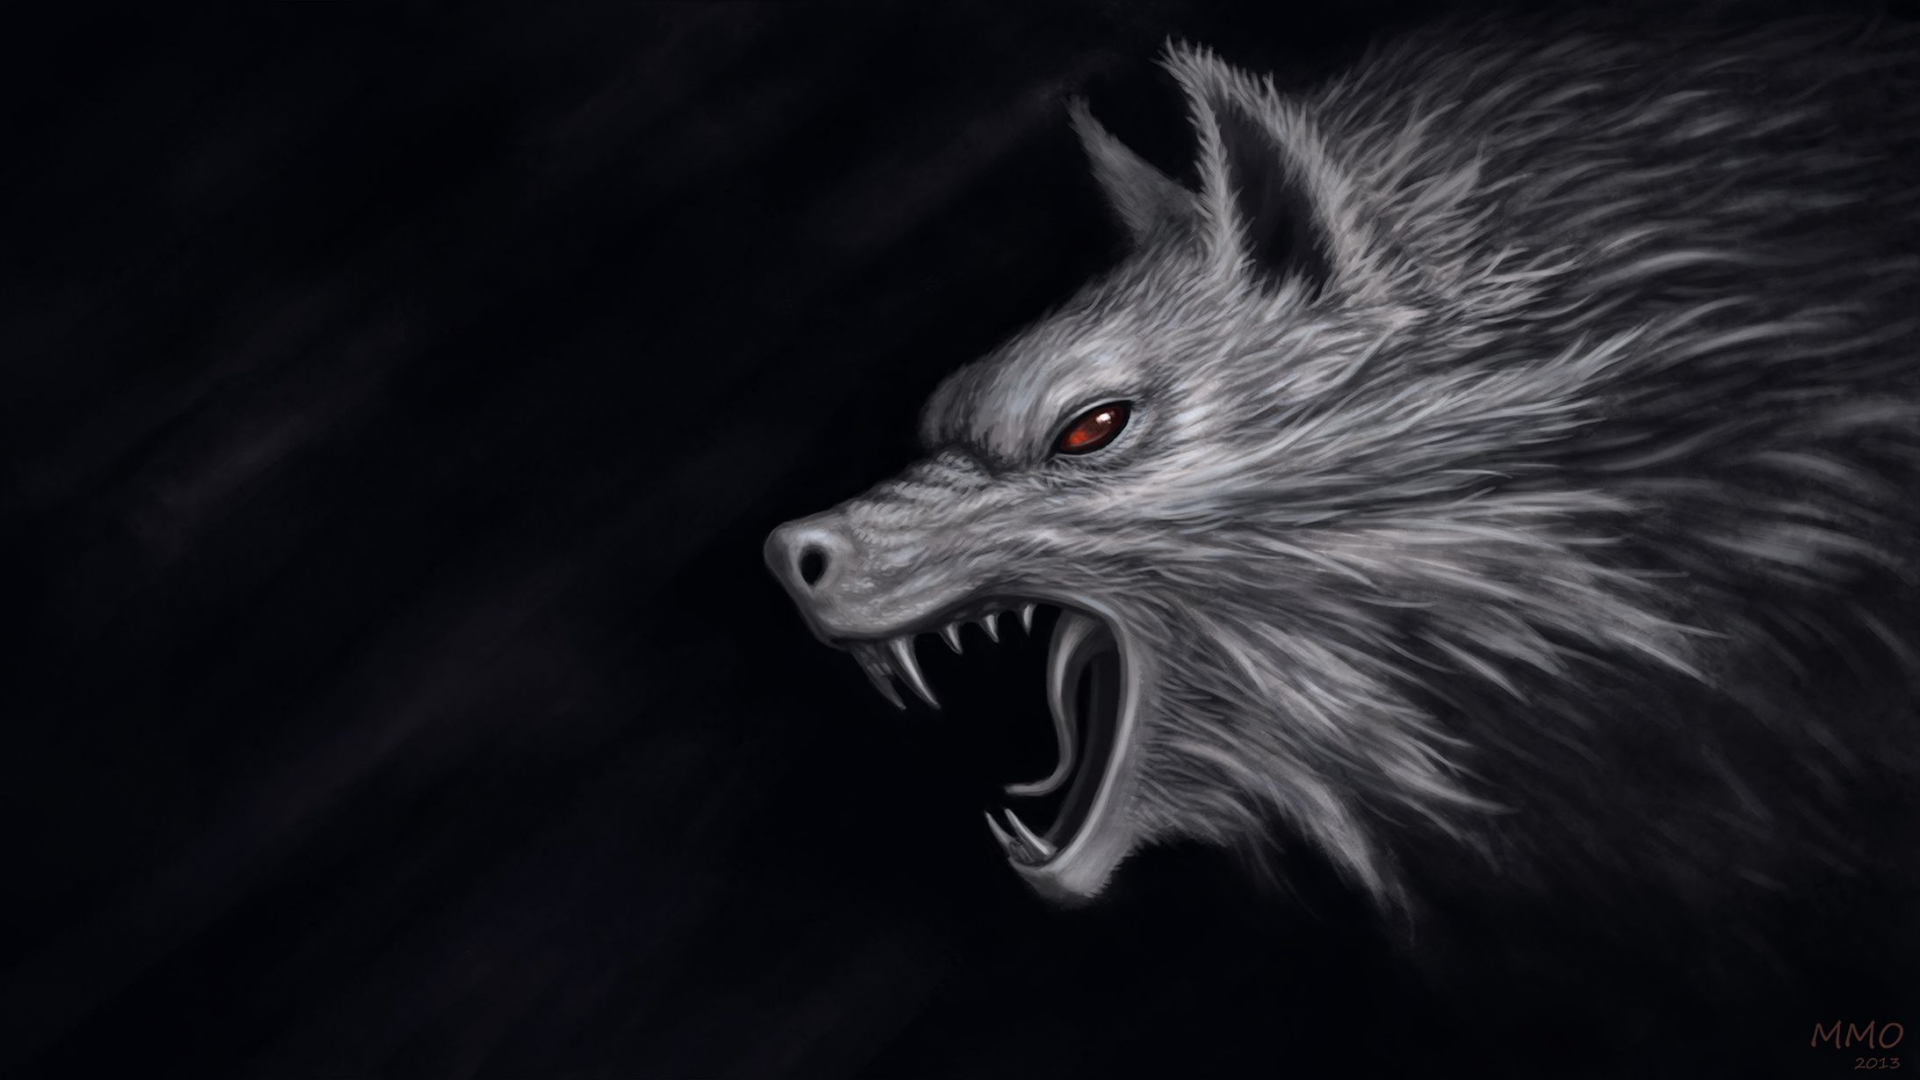 Scary Wolf Wallpapers